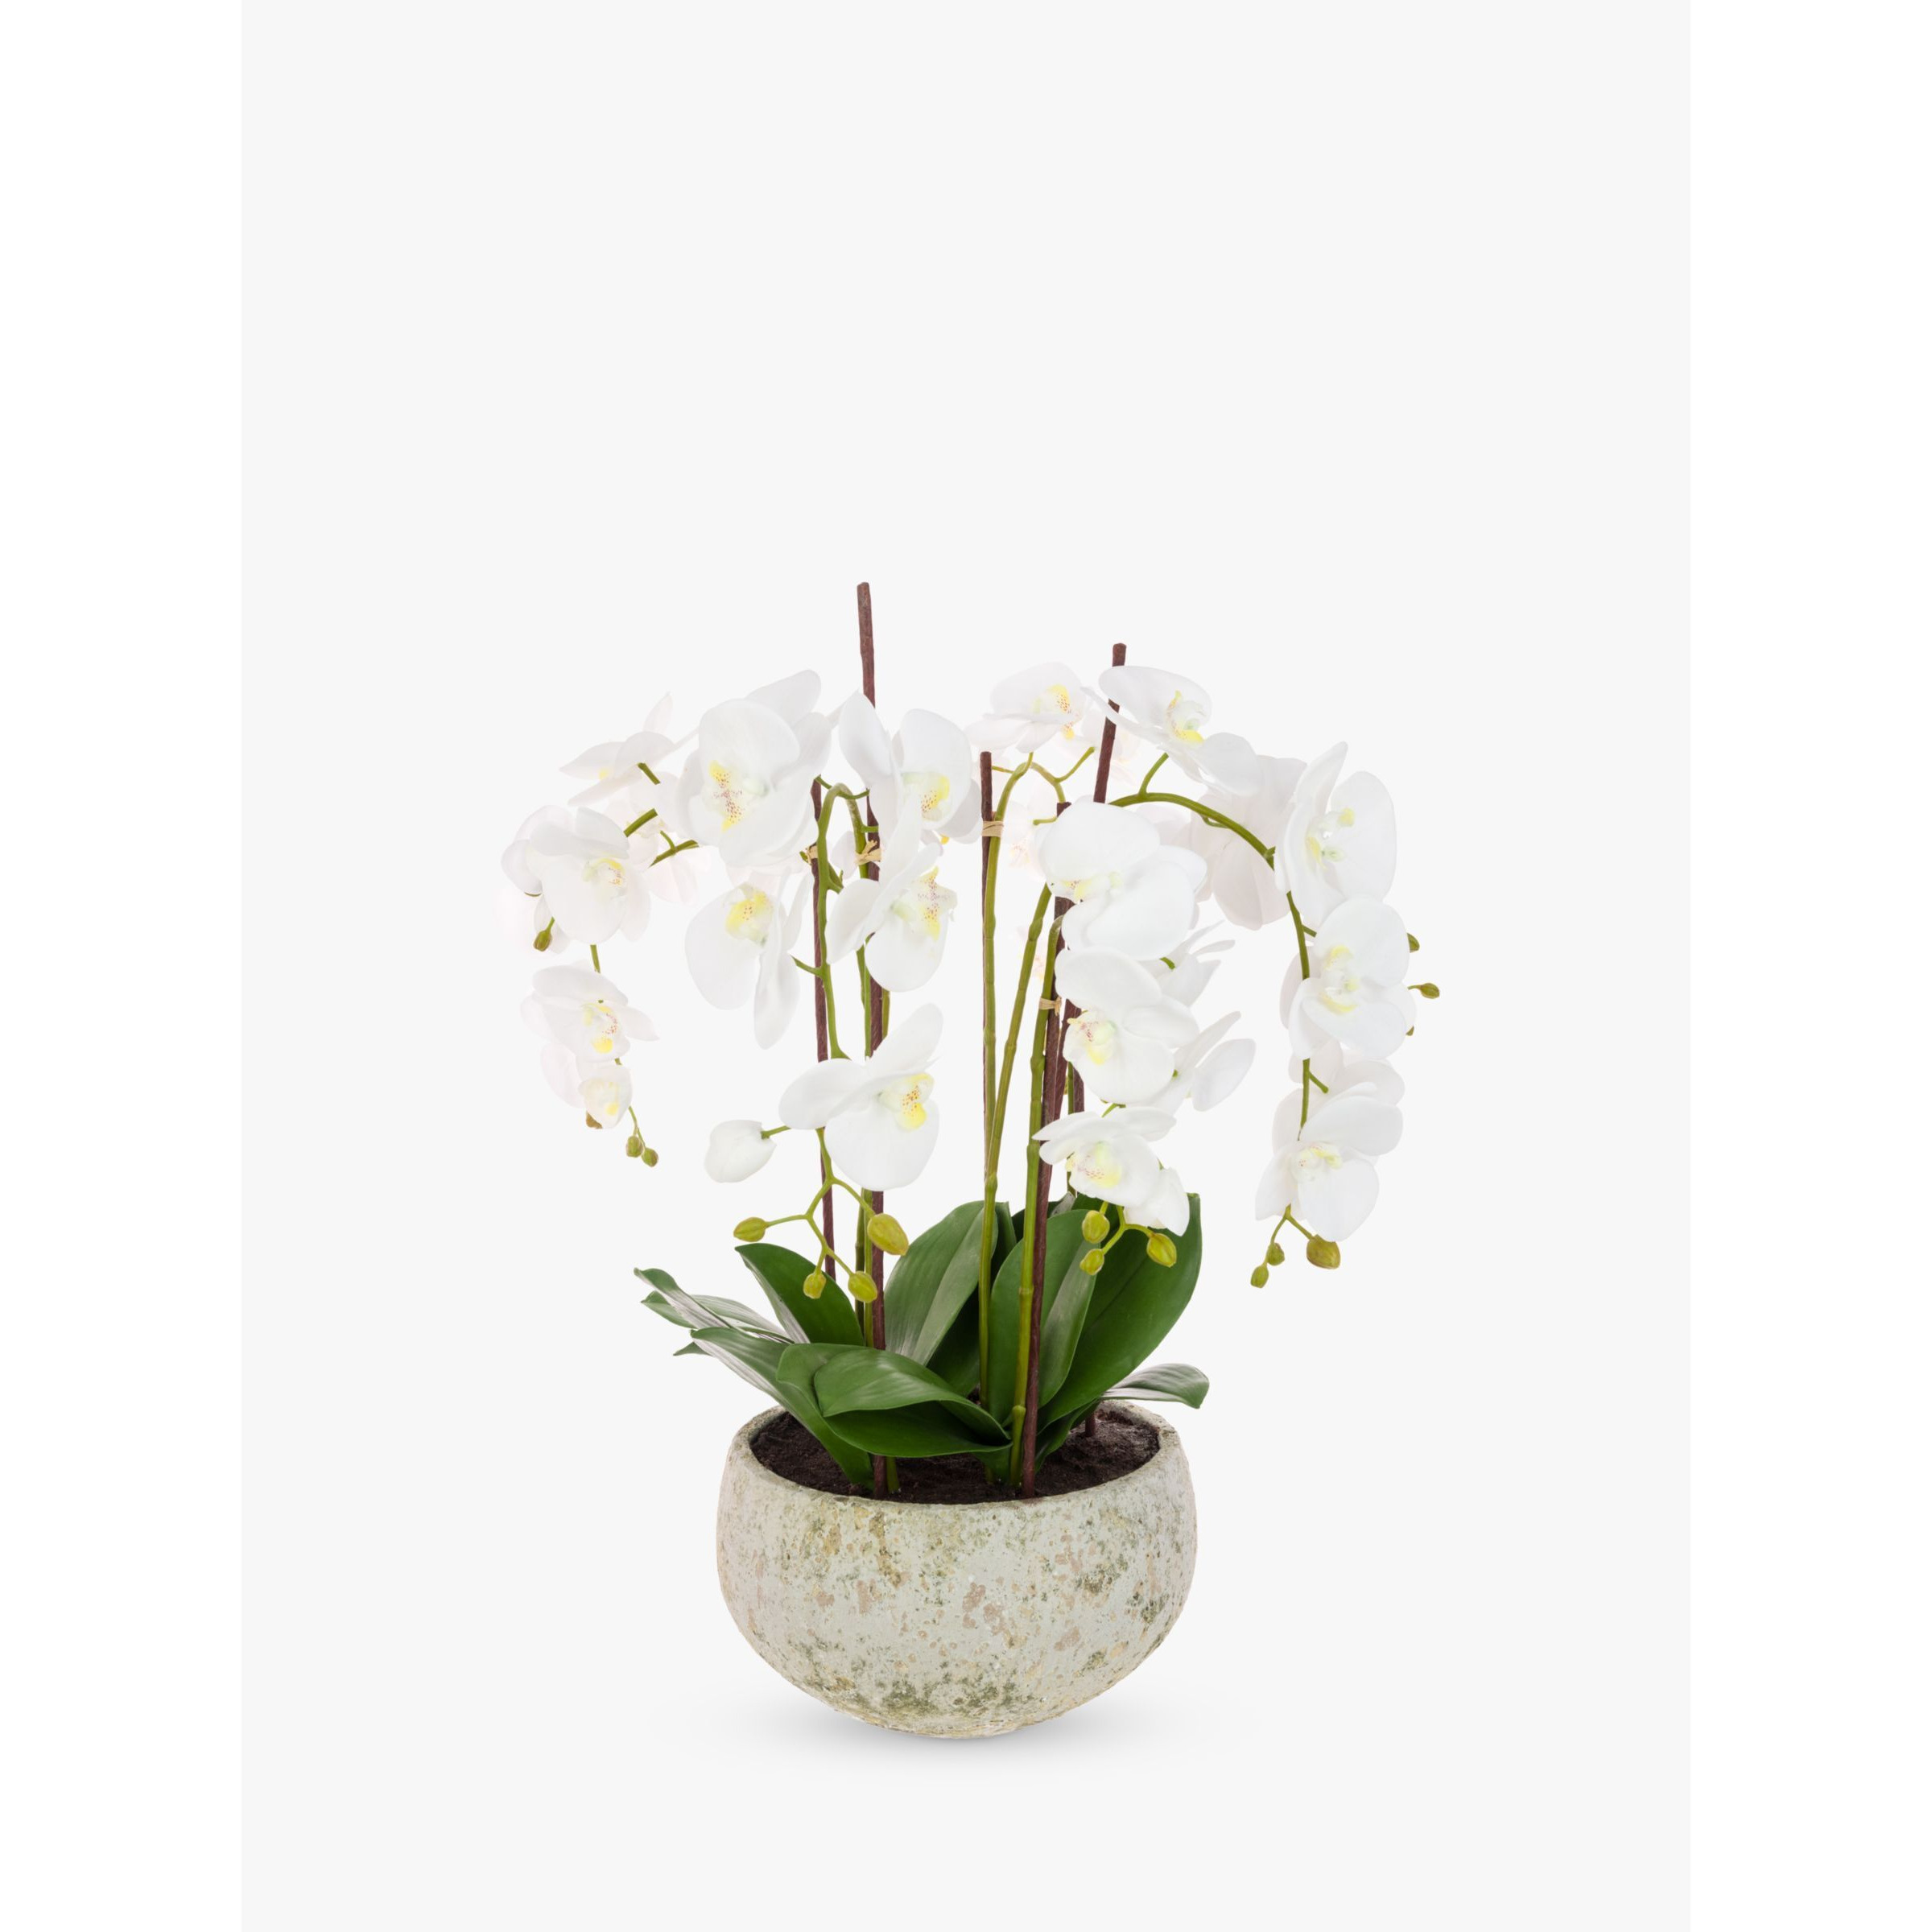 Floralsilk Artificial White Orchid in Clay Pot - image 1